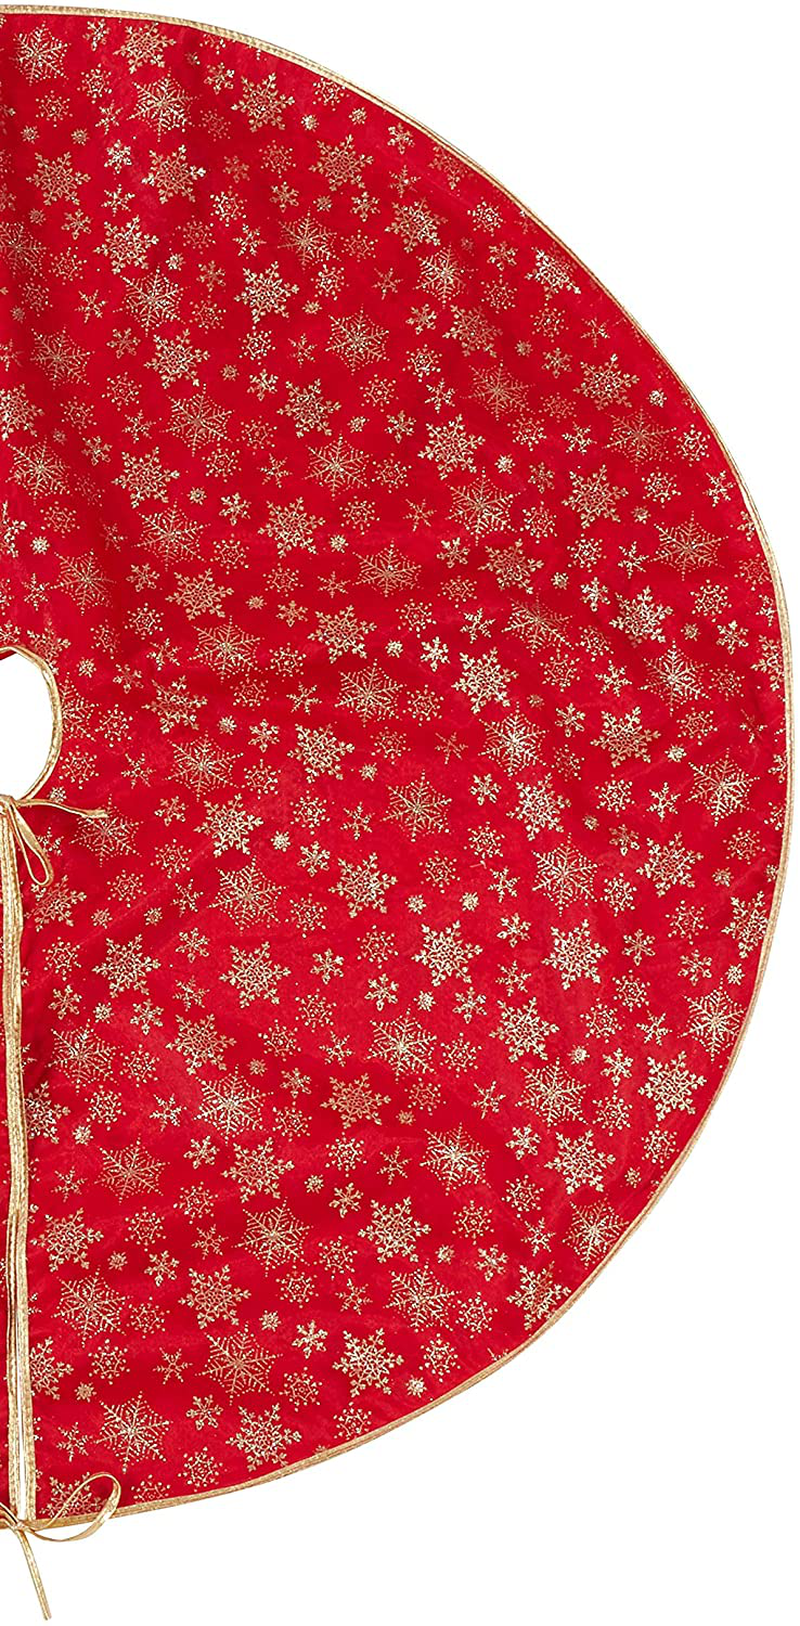 SARO LIFESTYLE Flocon de Neige Collection Red Organza Christmas Tree Skirt with Gold Snowflake Design, 48"